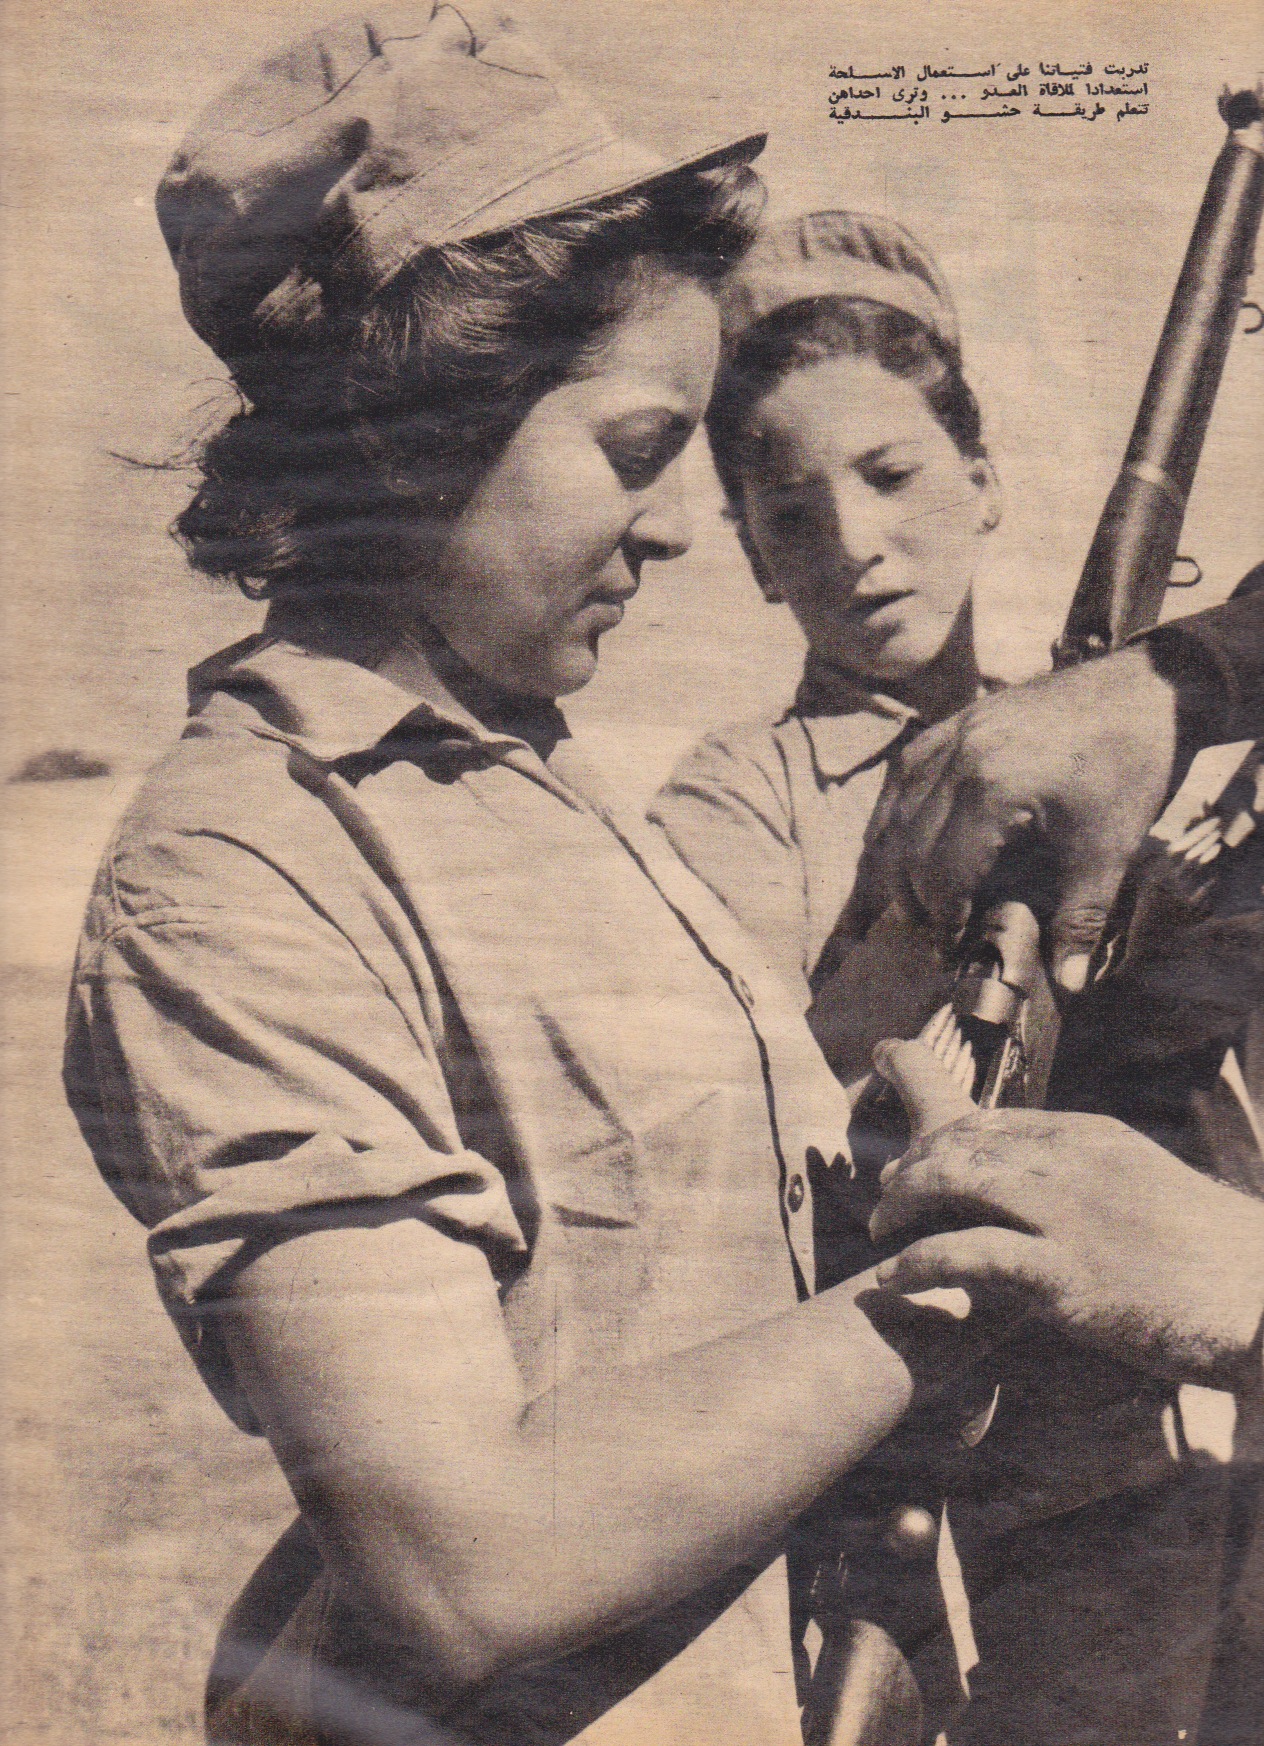 Egyptian women volunteer to bear arms in 1956